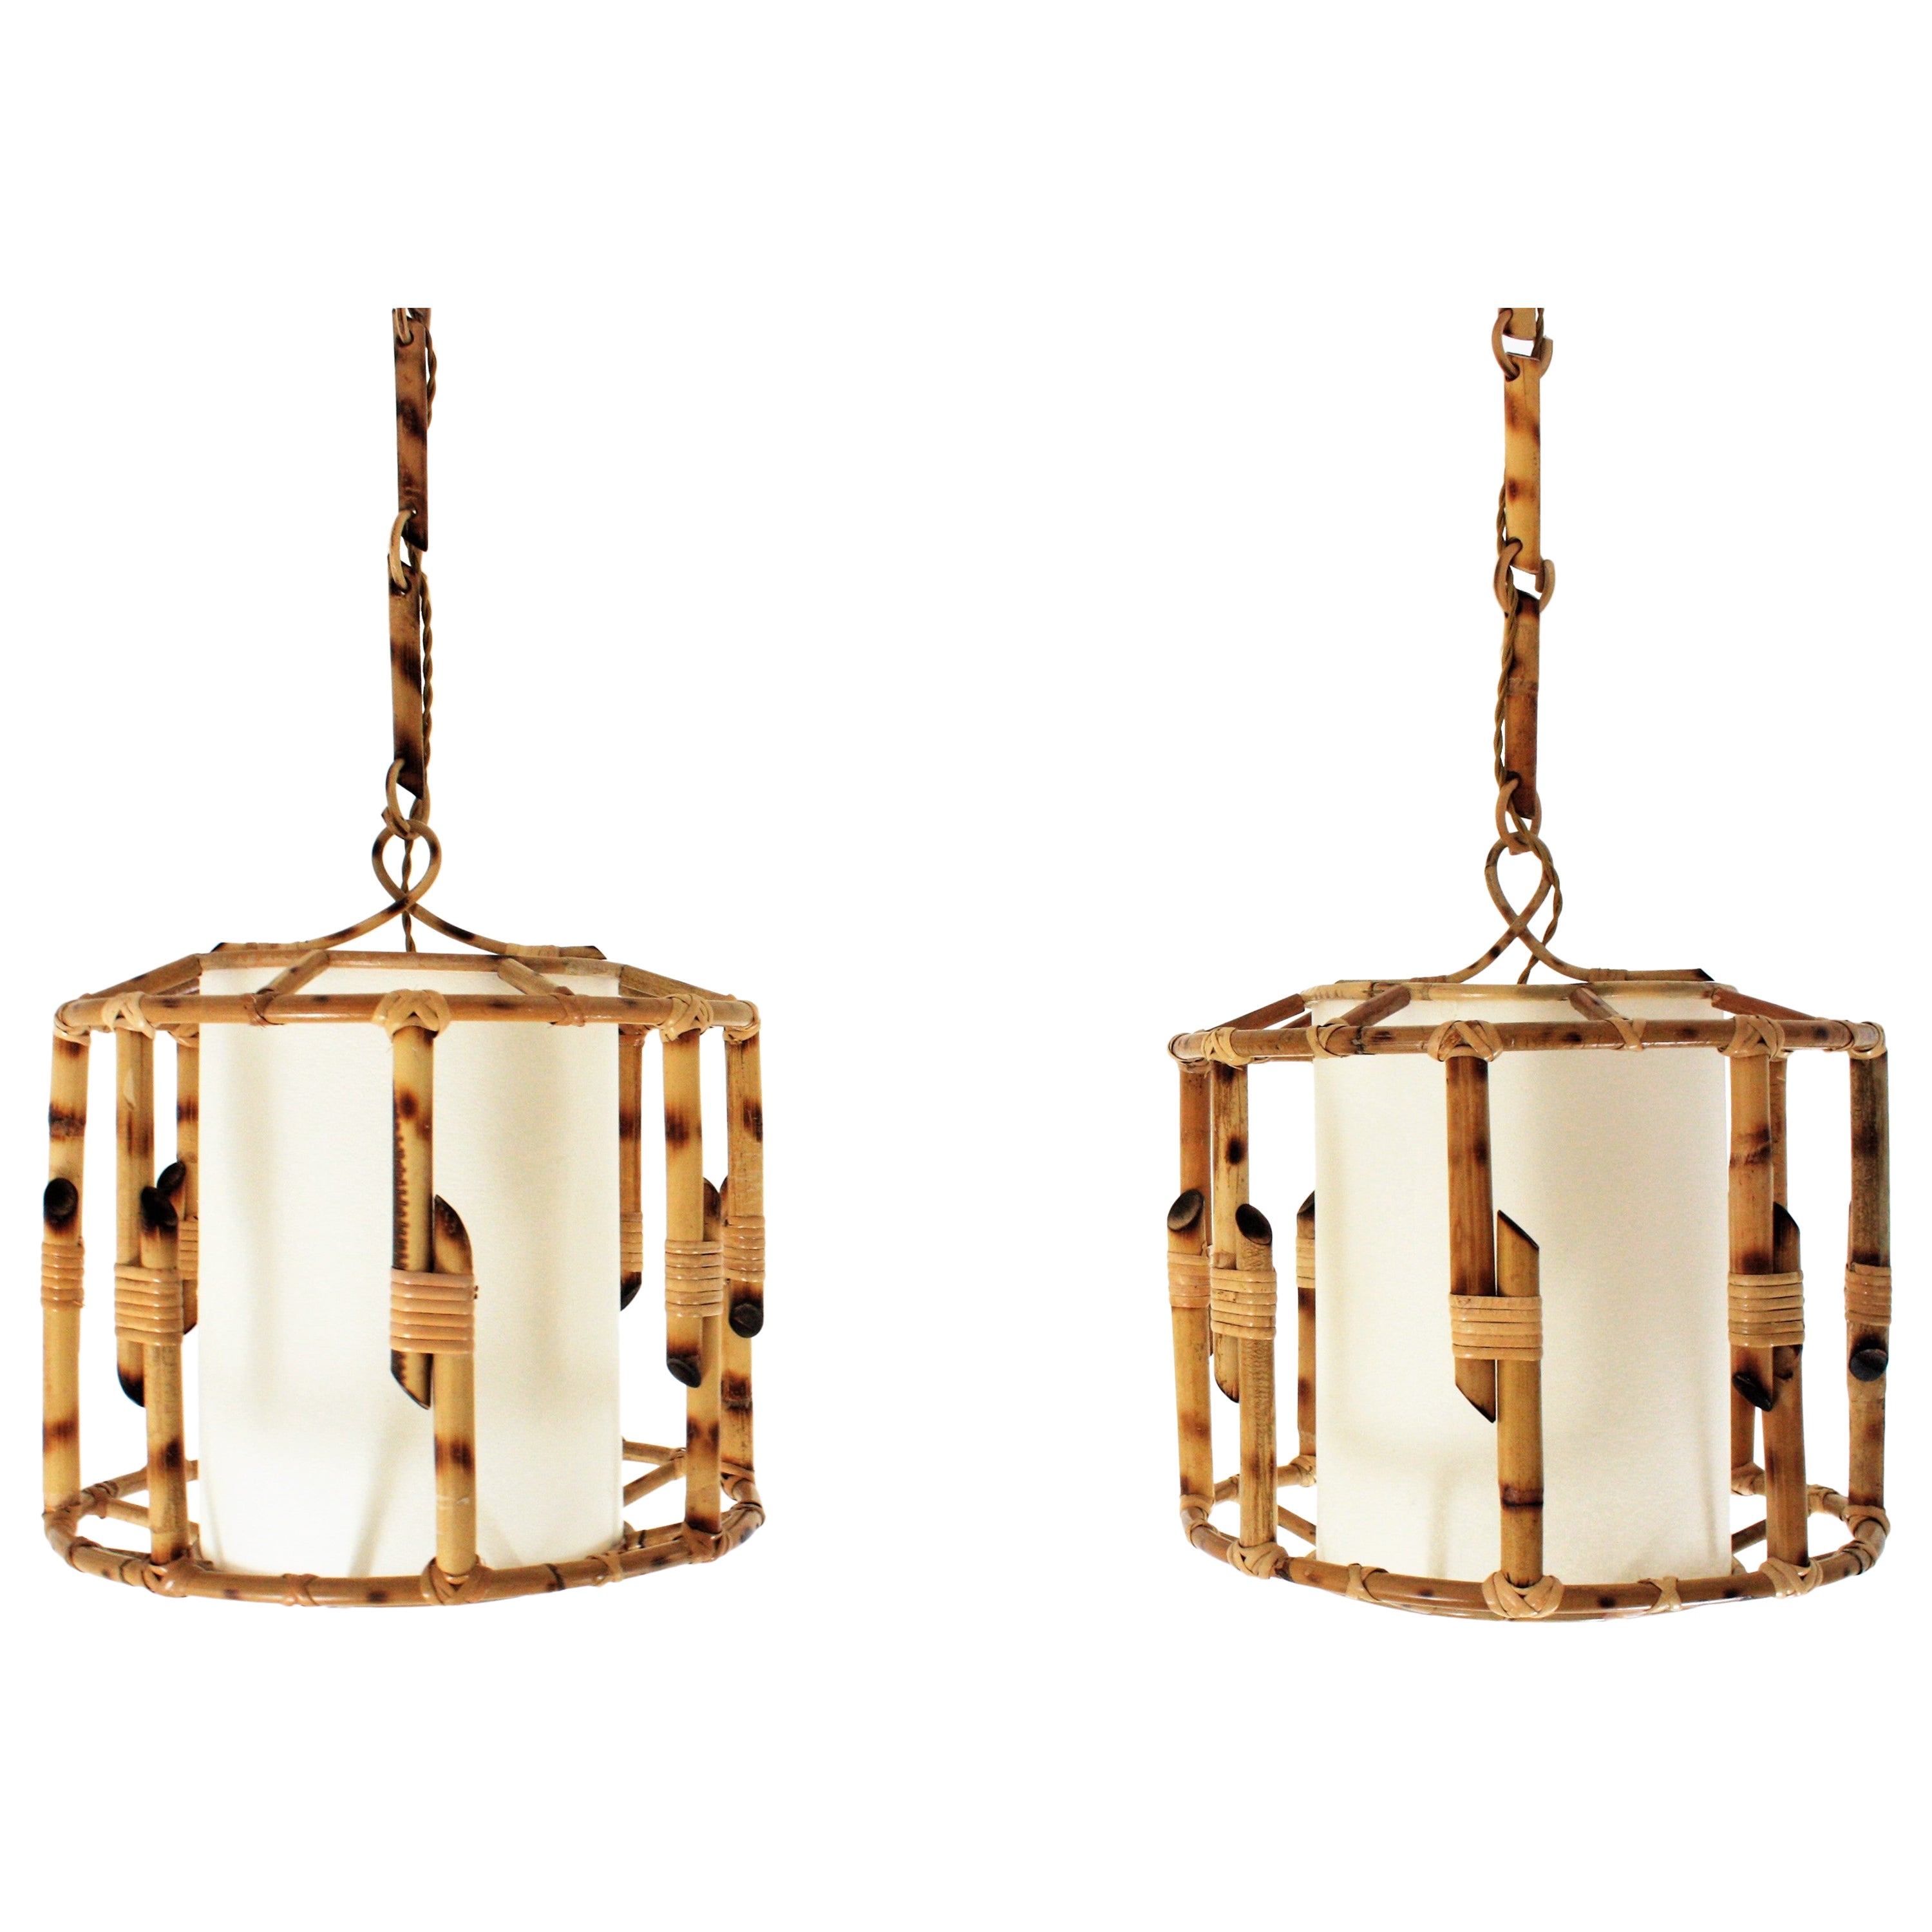 Pair of Bamboo Rattan Large Drum Pendant Lights / Lanterns For Sale